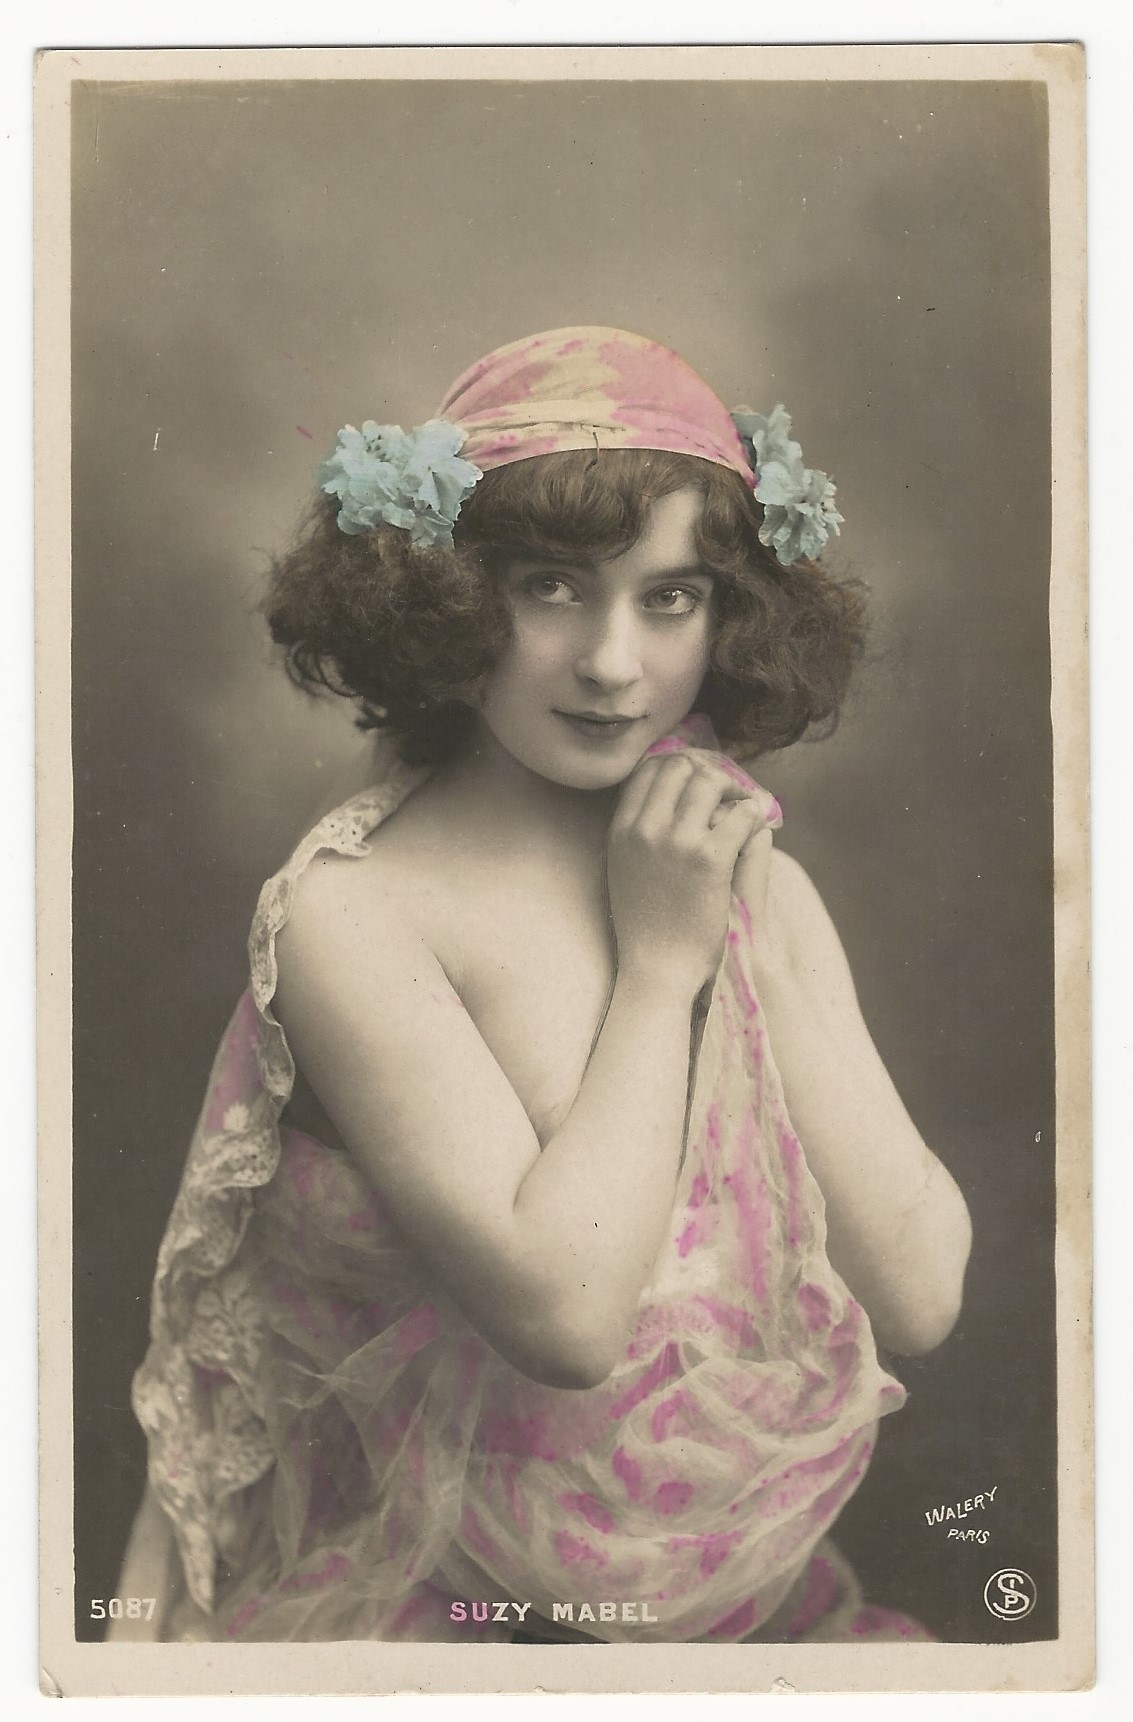 SUZY MABEL : PRETTY YOUNG ACTRESS : PERFORMED AT THE MUSIC HALLS OF PARIS